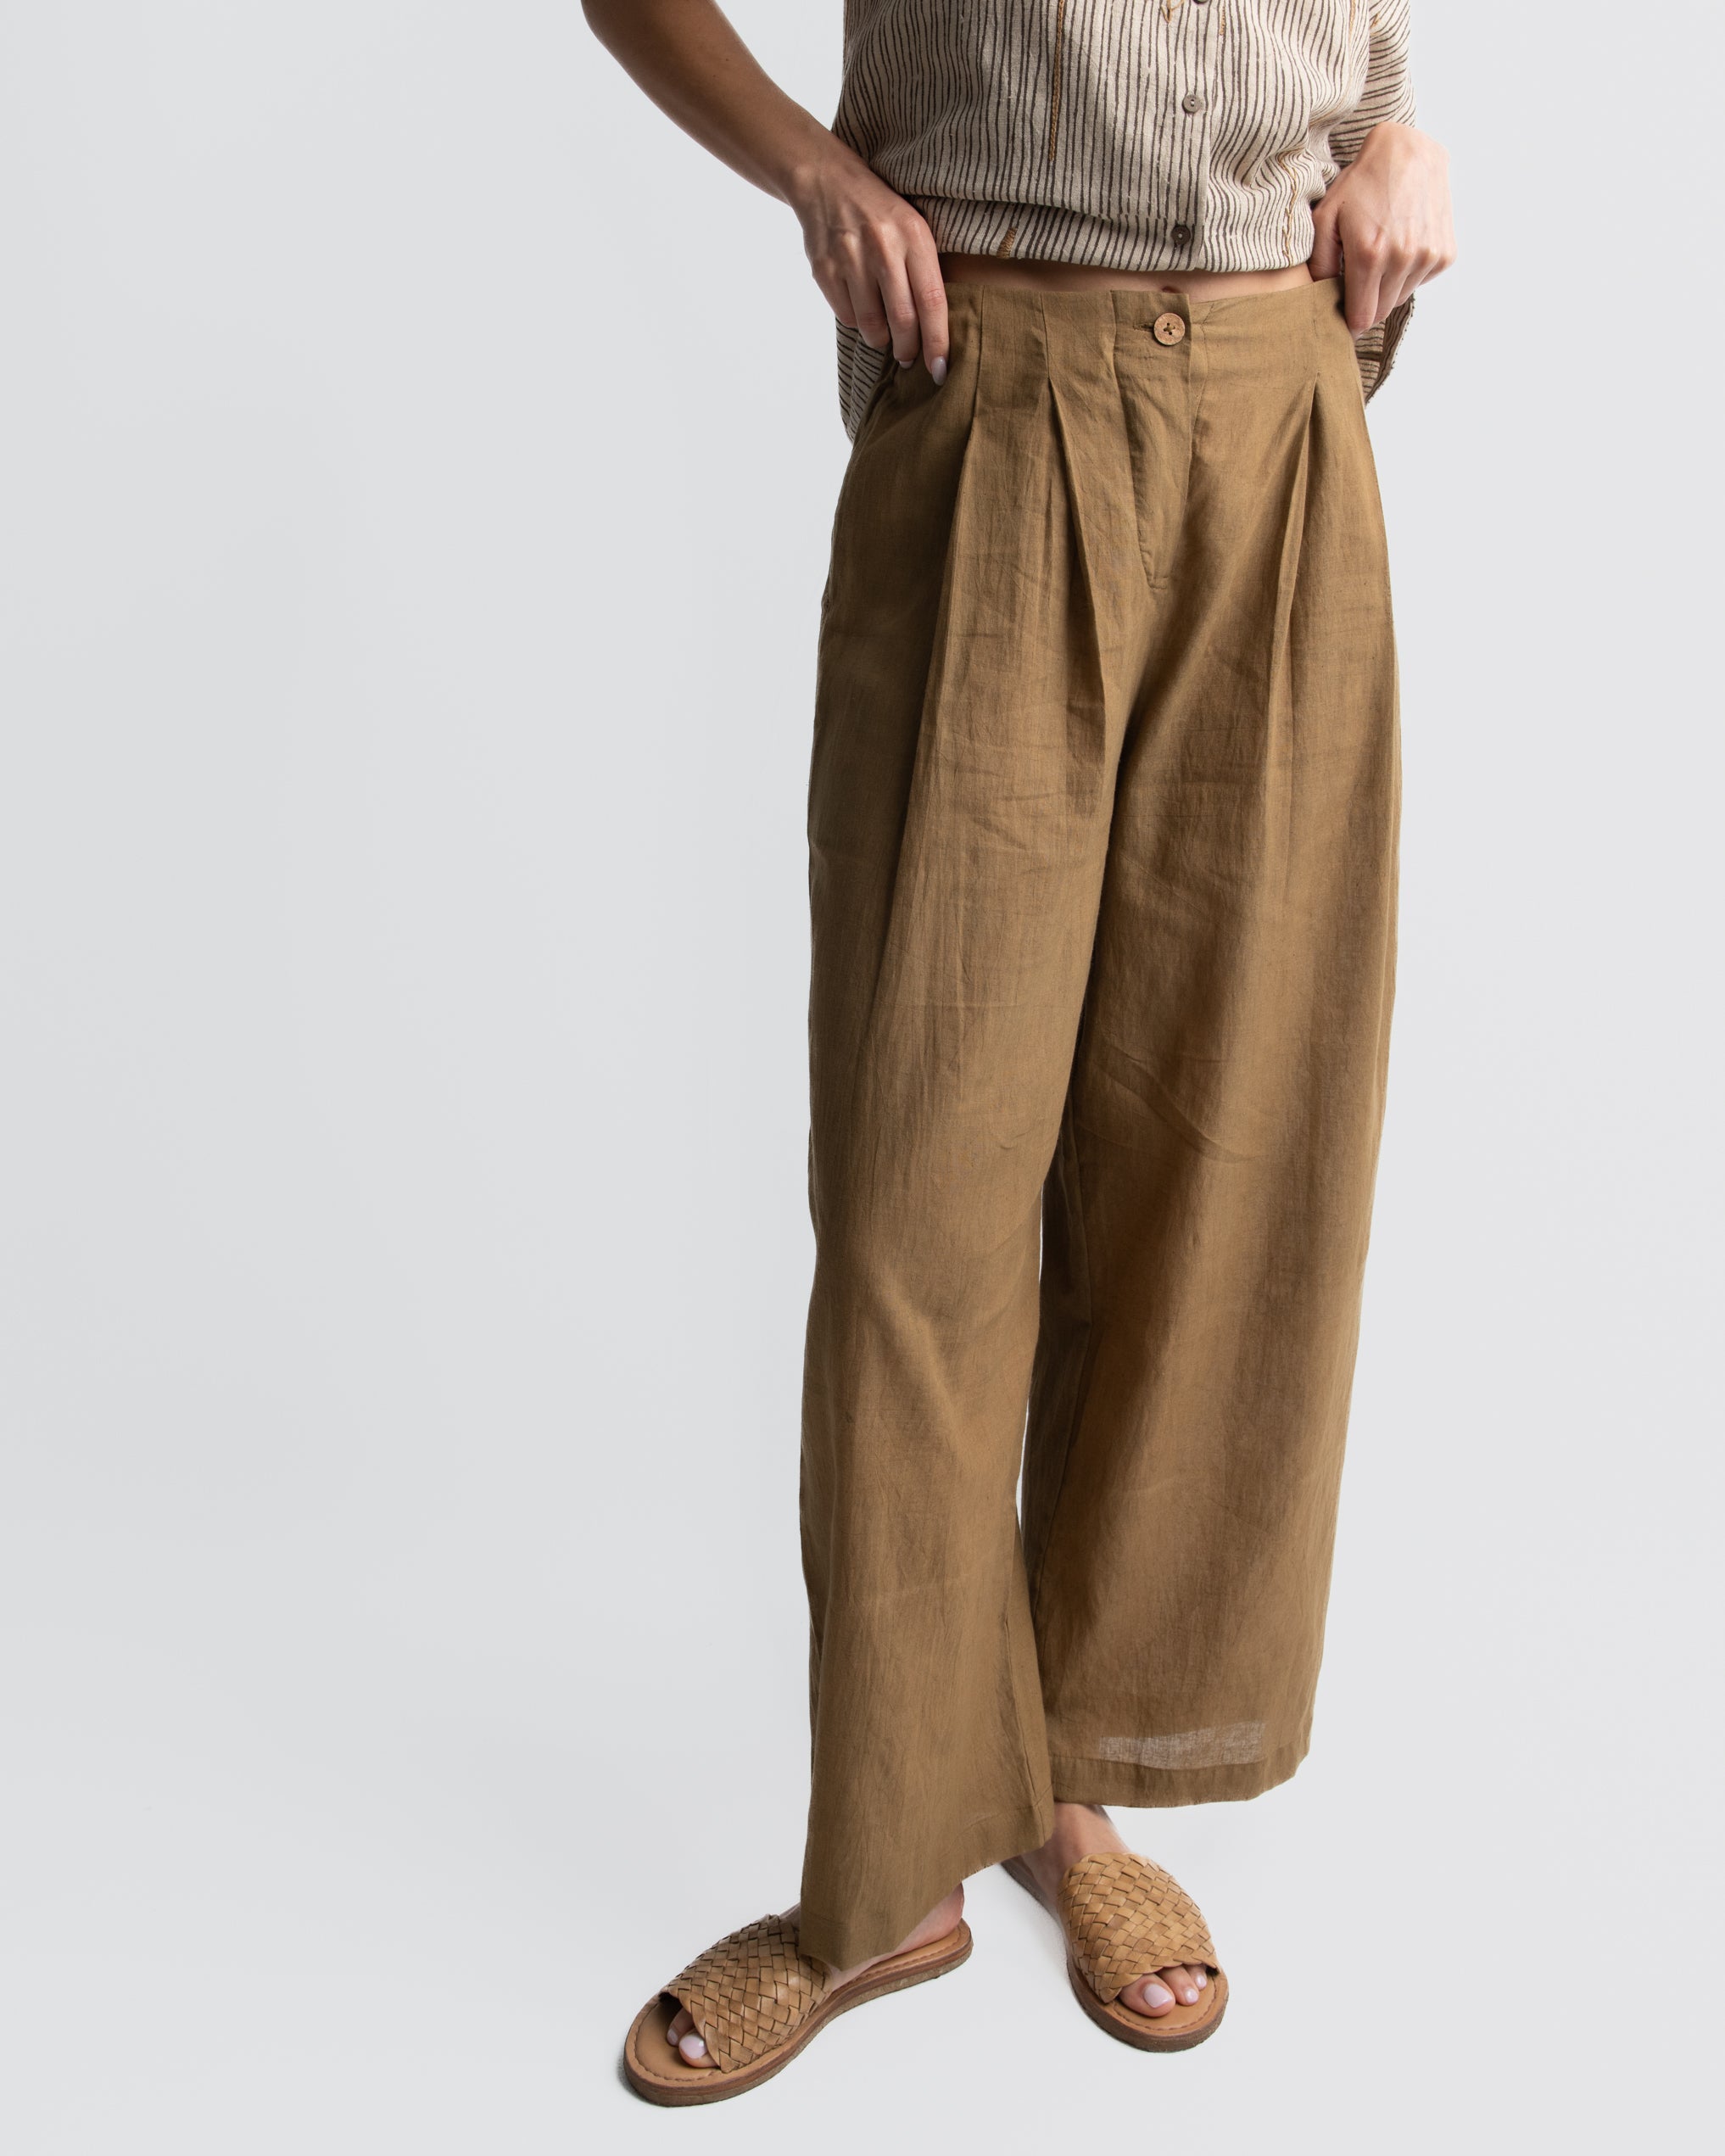 Men Relaxed Fit Trousers  Buy Men Relaxed Fit Trousers online in India